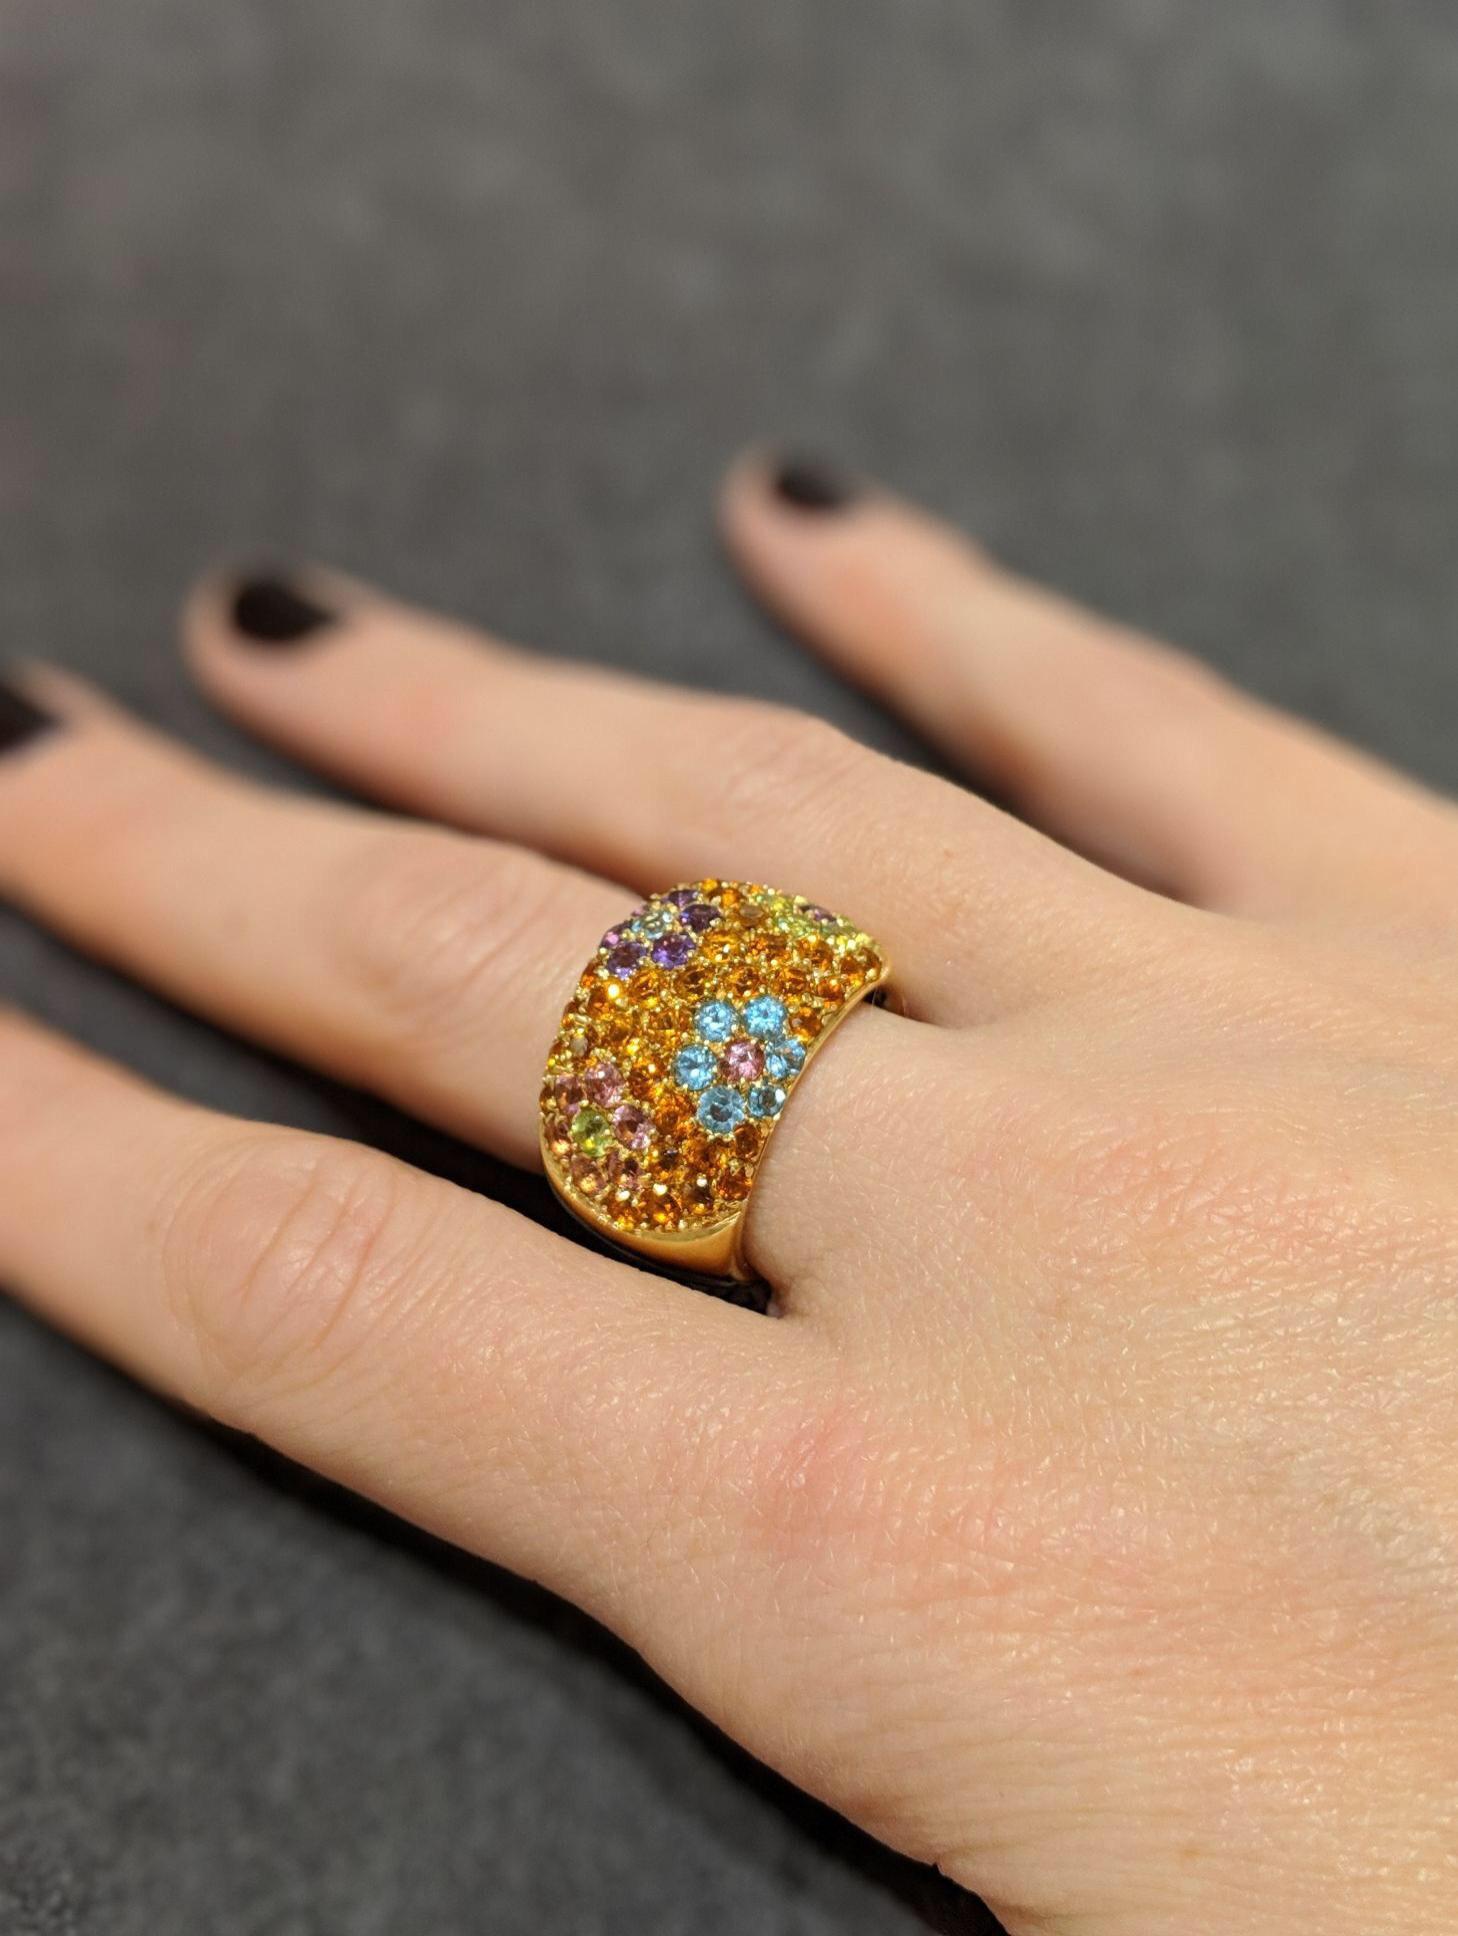 Italian Jewelers for more than three generations, VAID has produced merchandise exclusively for some of the most renowned jewelers across the world. This VAID designed 18-karat yellow gold band is set with amethyst, pink tourmaline, peridot and blue